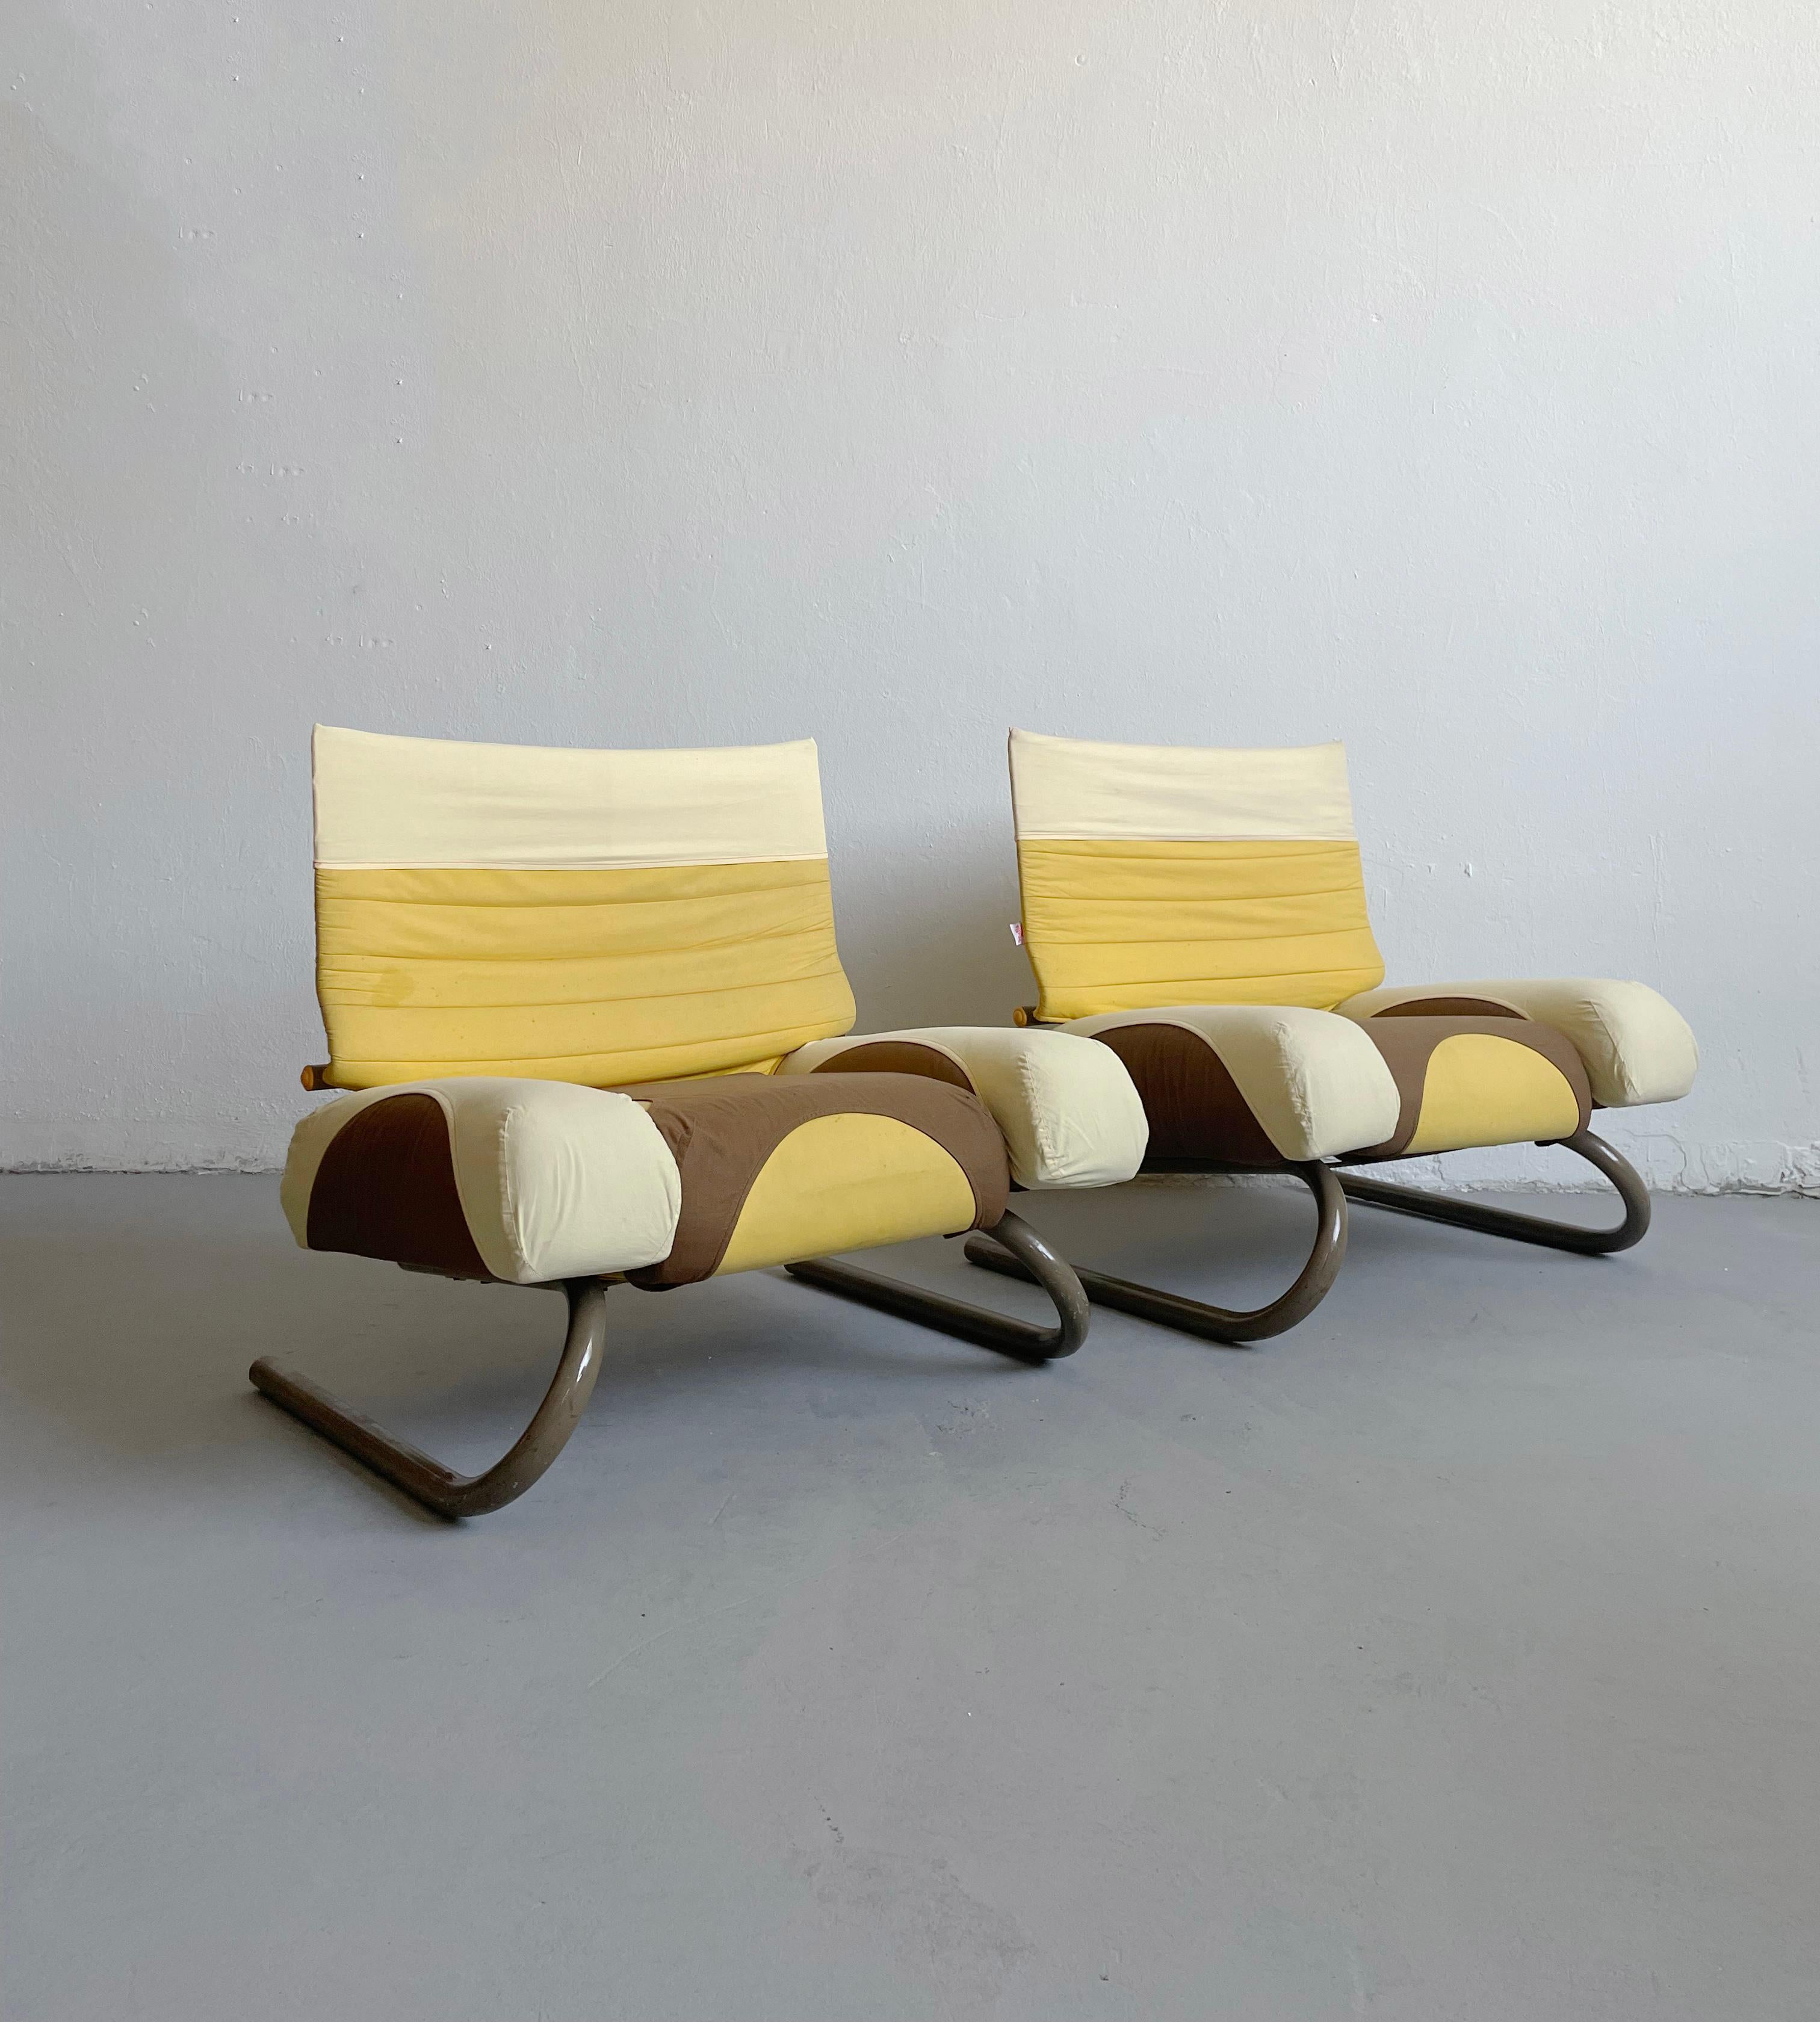 A set of 2 very rare lounge chairs 'Peter Pan' designed by the influential Italian architect and designer Michele de Lucchi in 1982 for Thalia & Co.

The chairs are a nice example of radical postmodern Italian design by Michele de Lucchi who was a